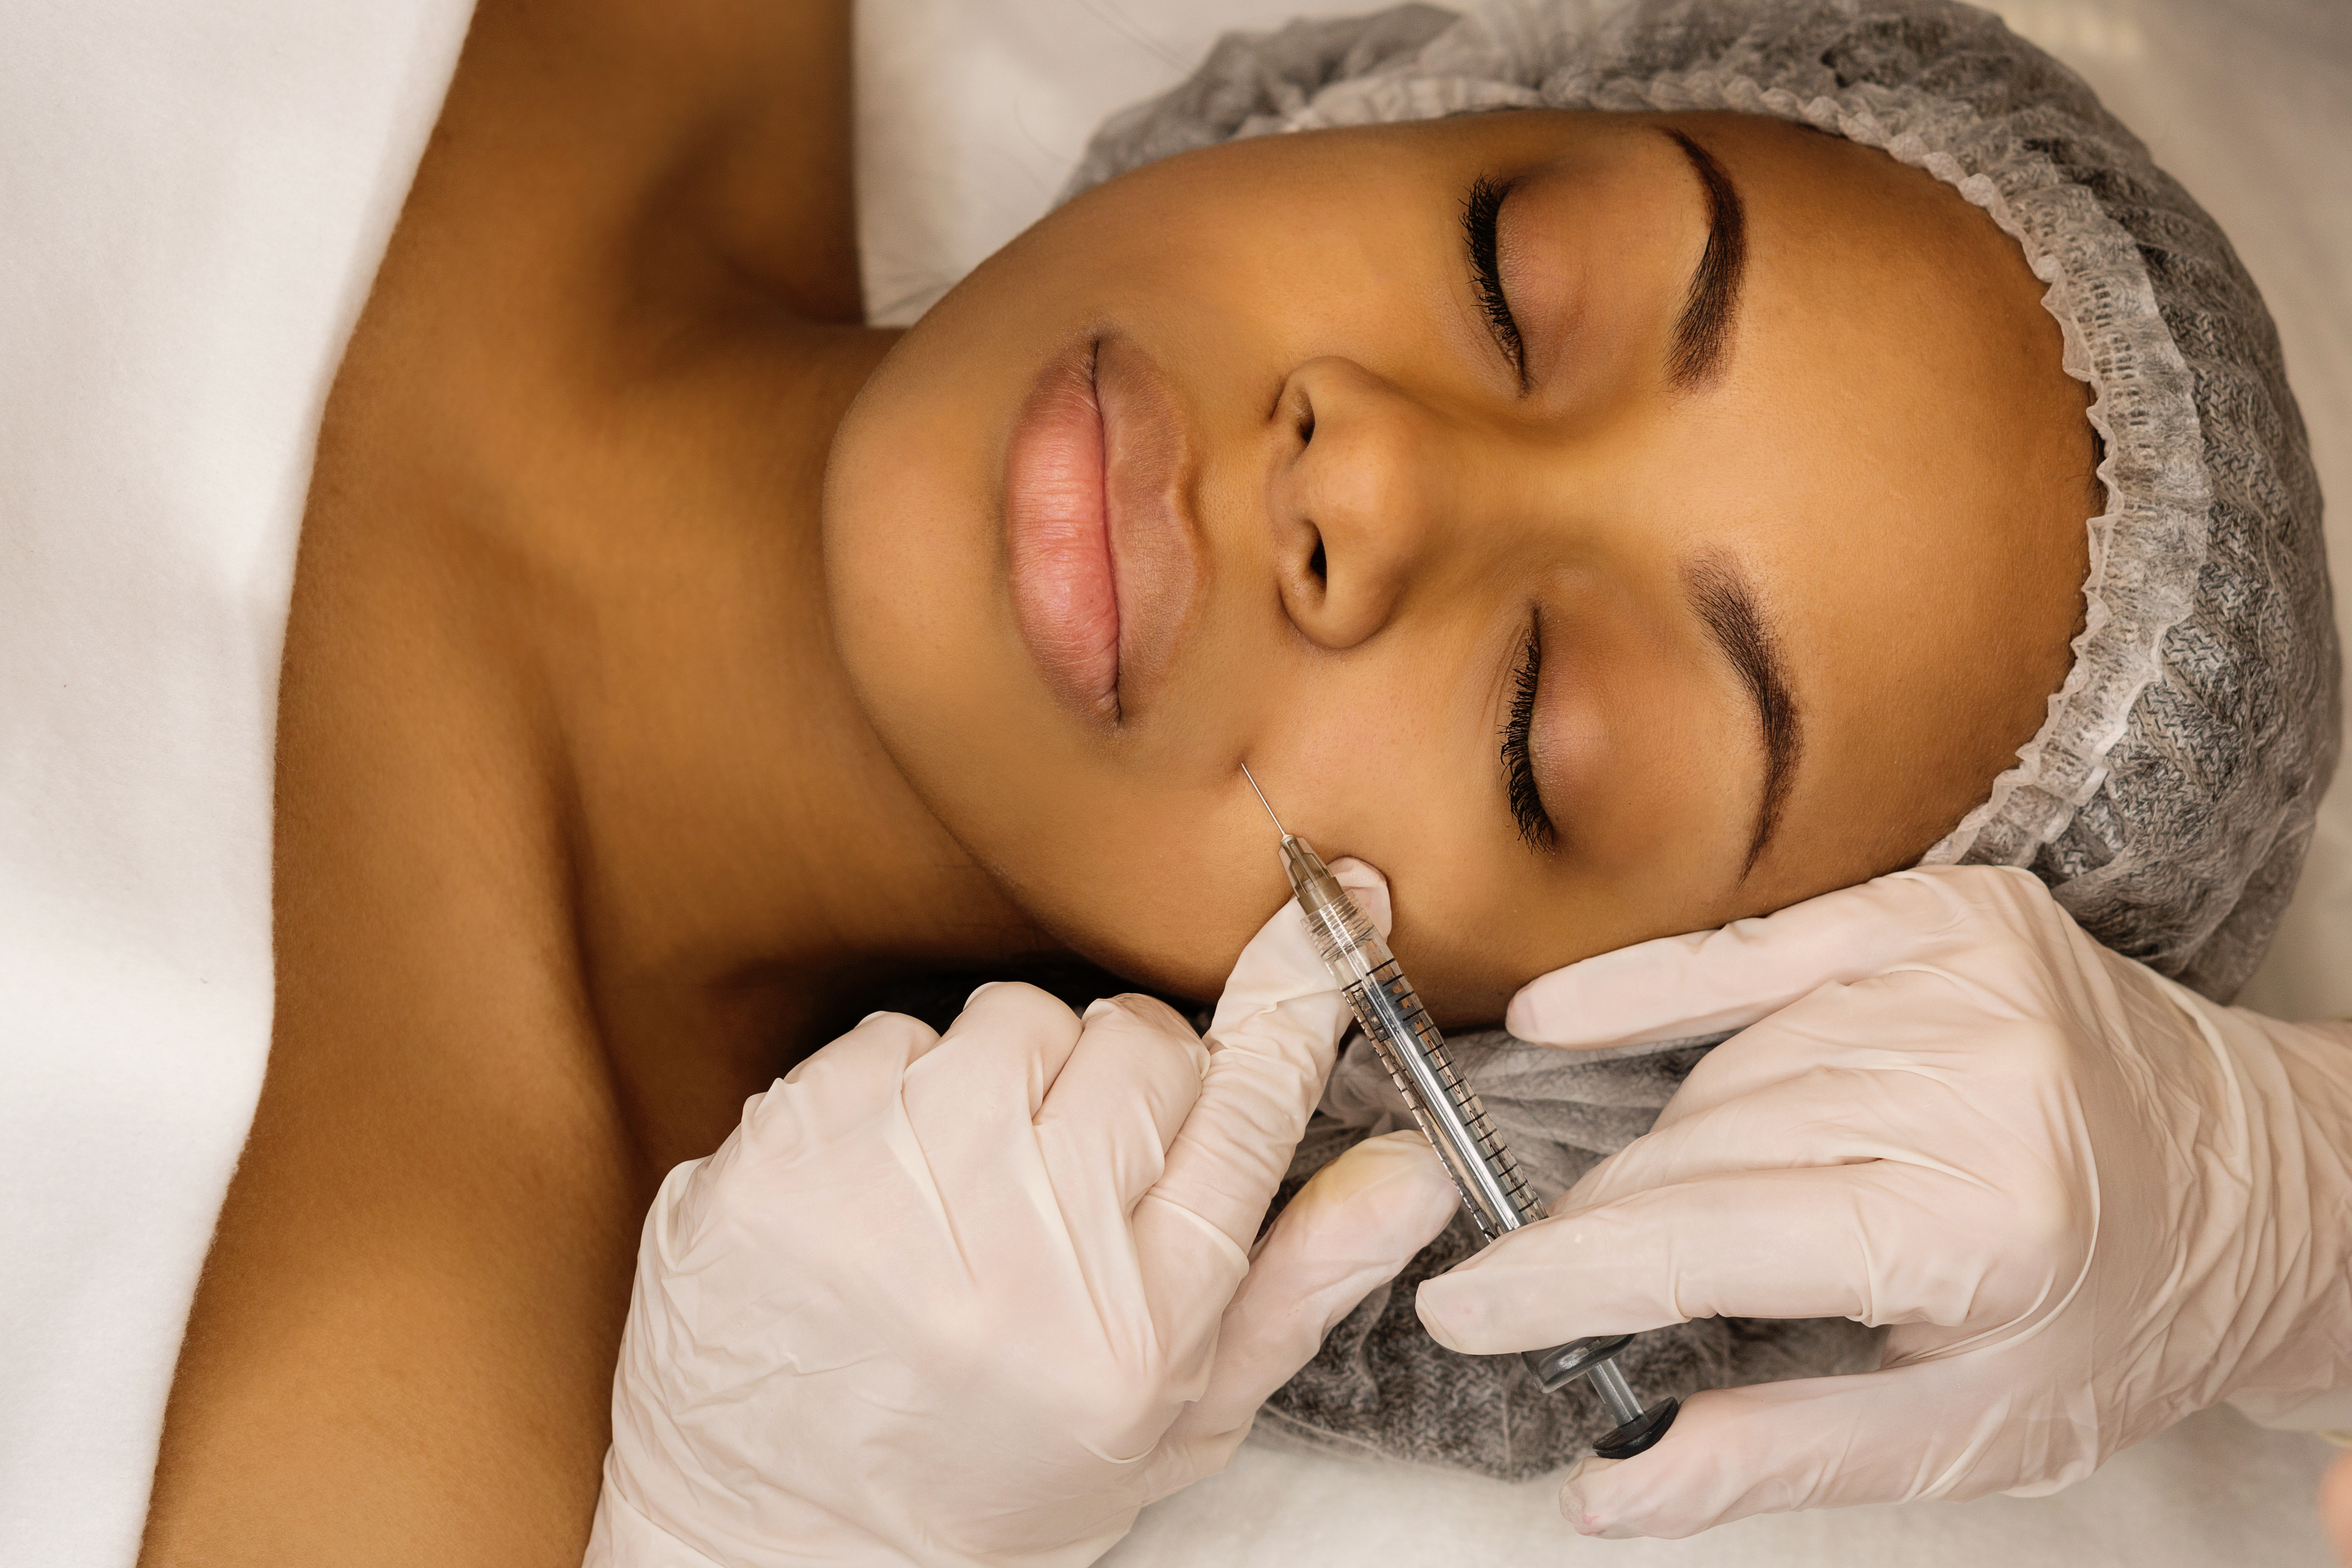 Global Demand for Aesthetic Procedures Surges